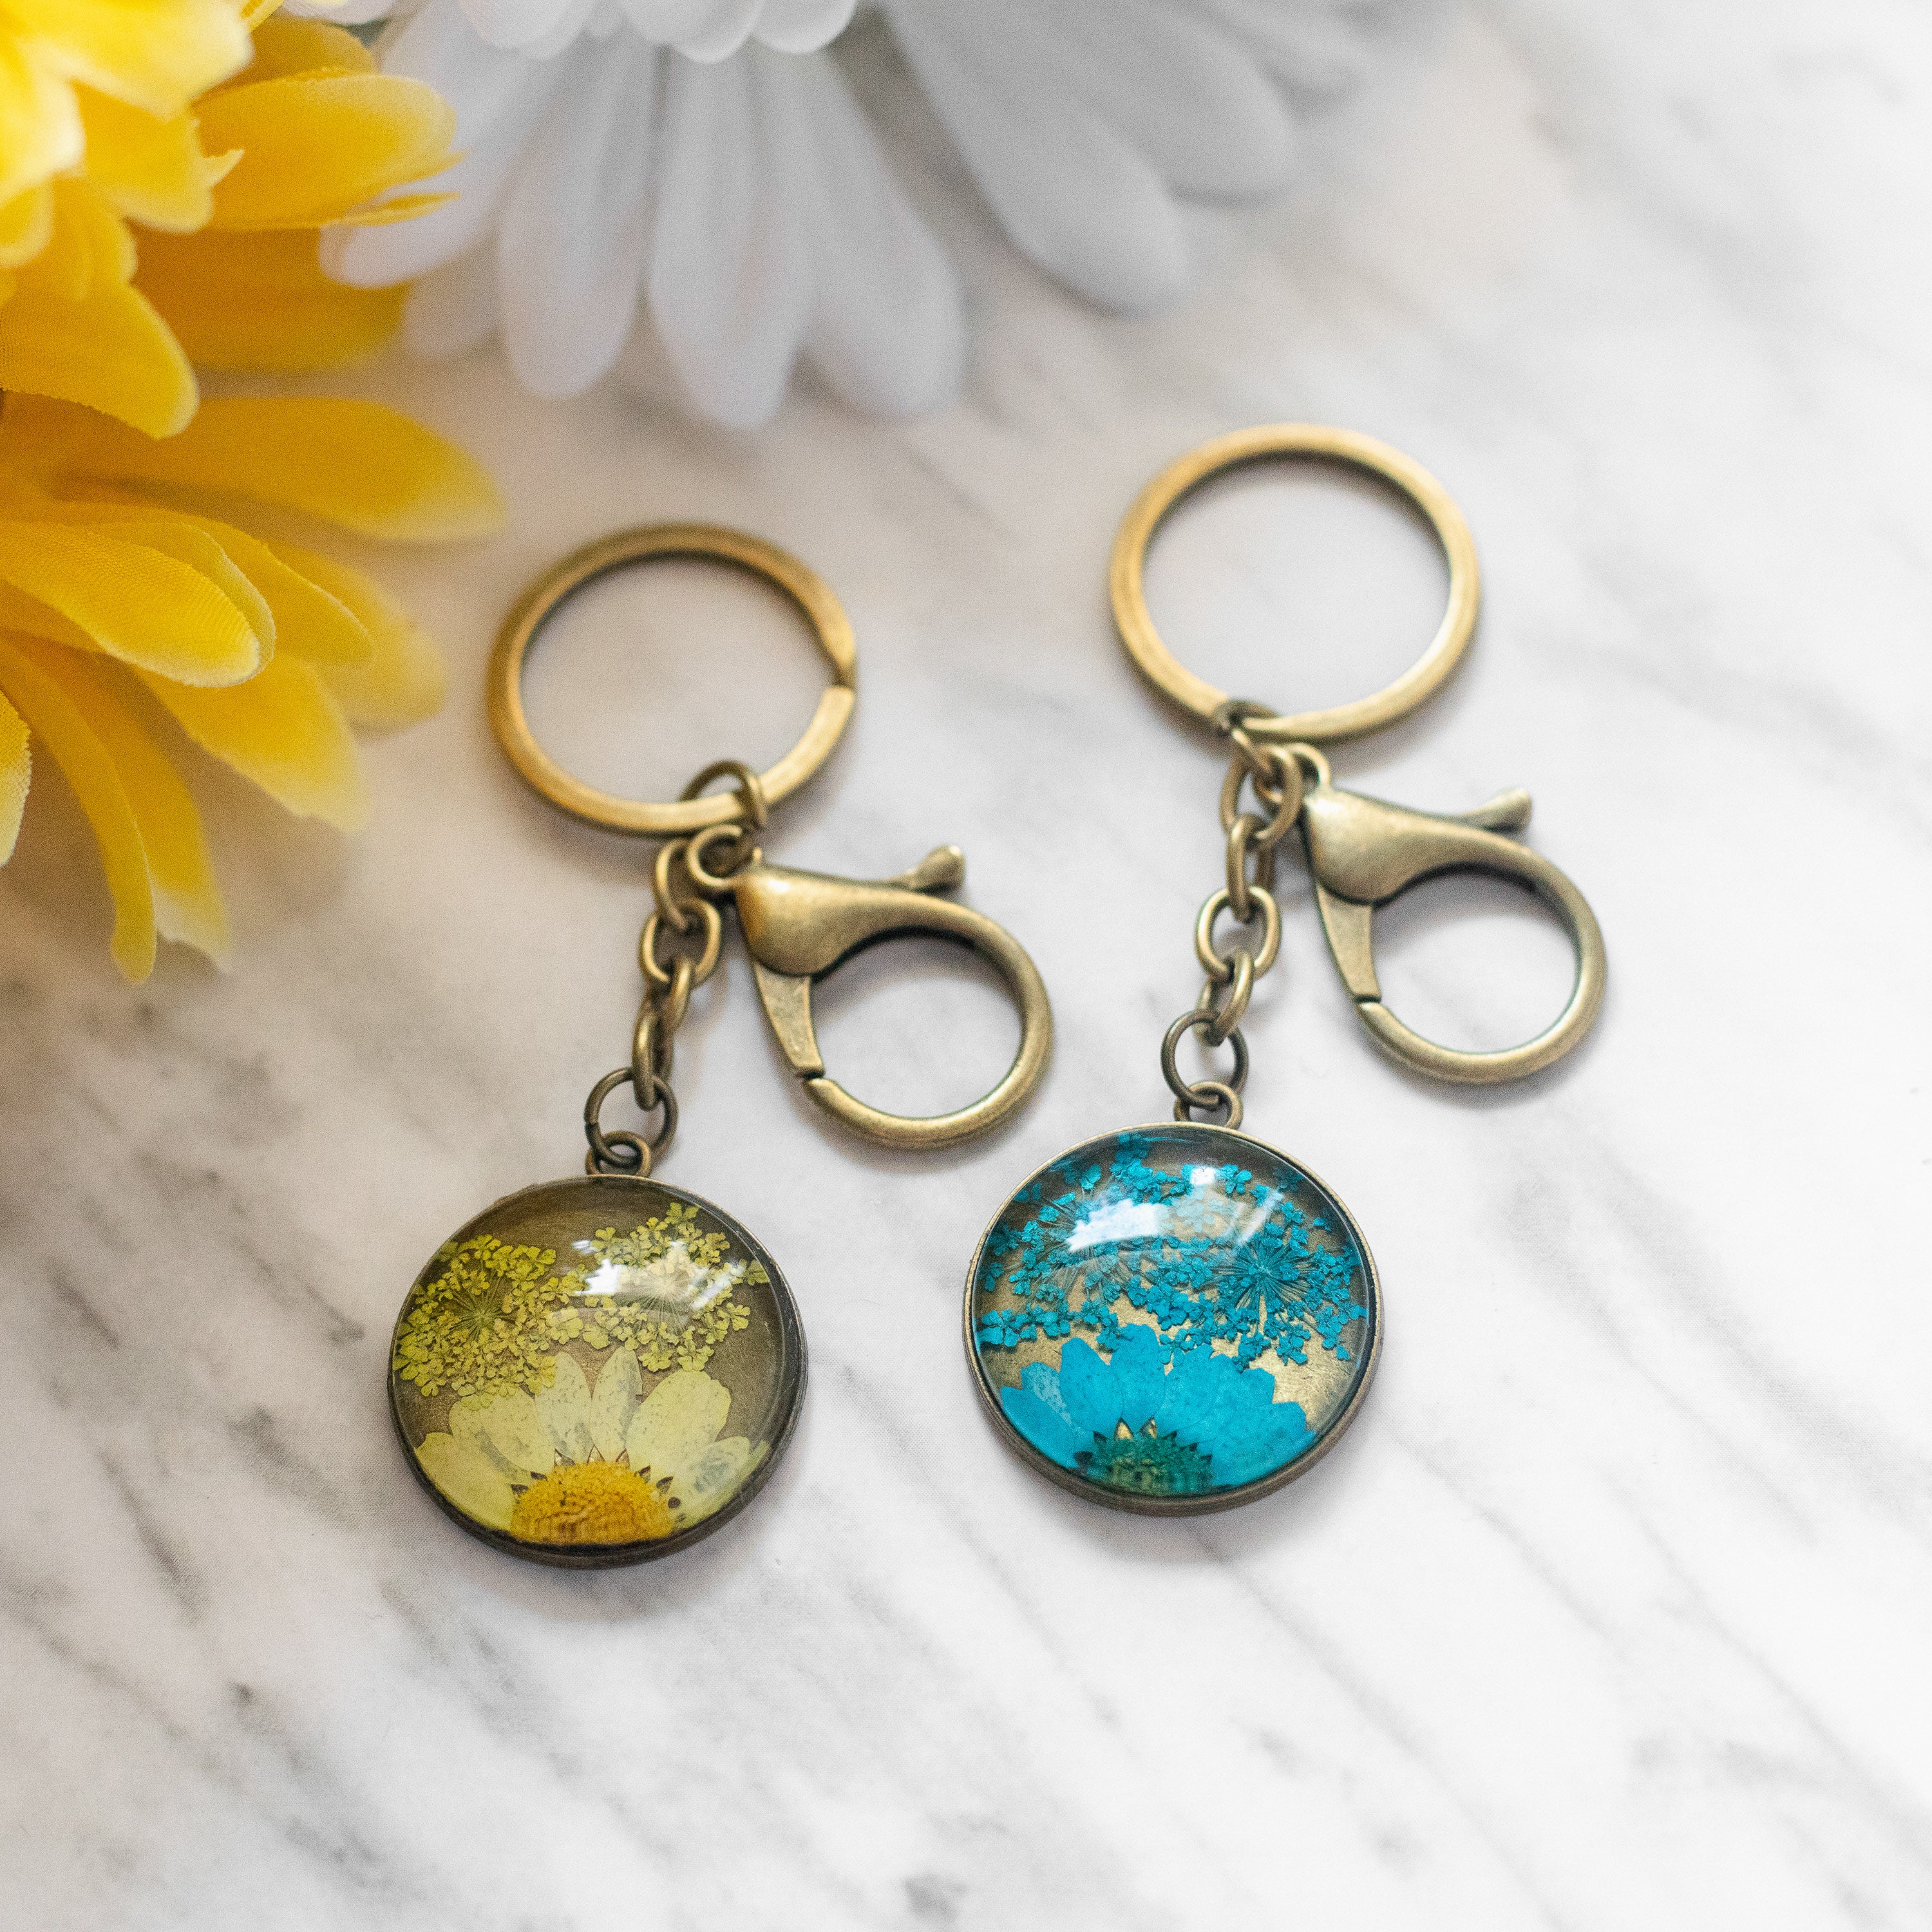 Real Pressed Flower Resin Keychain with Daisy and Lace Floral Neverland Floralfy 10